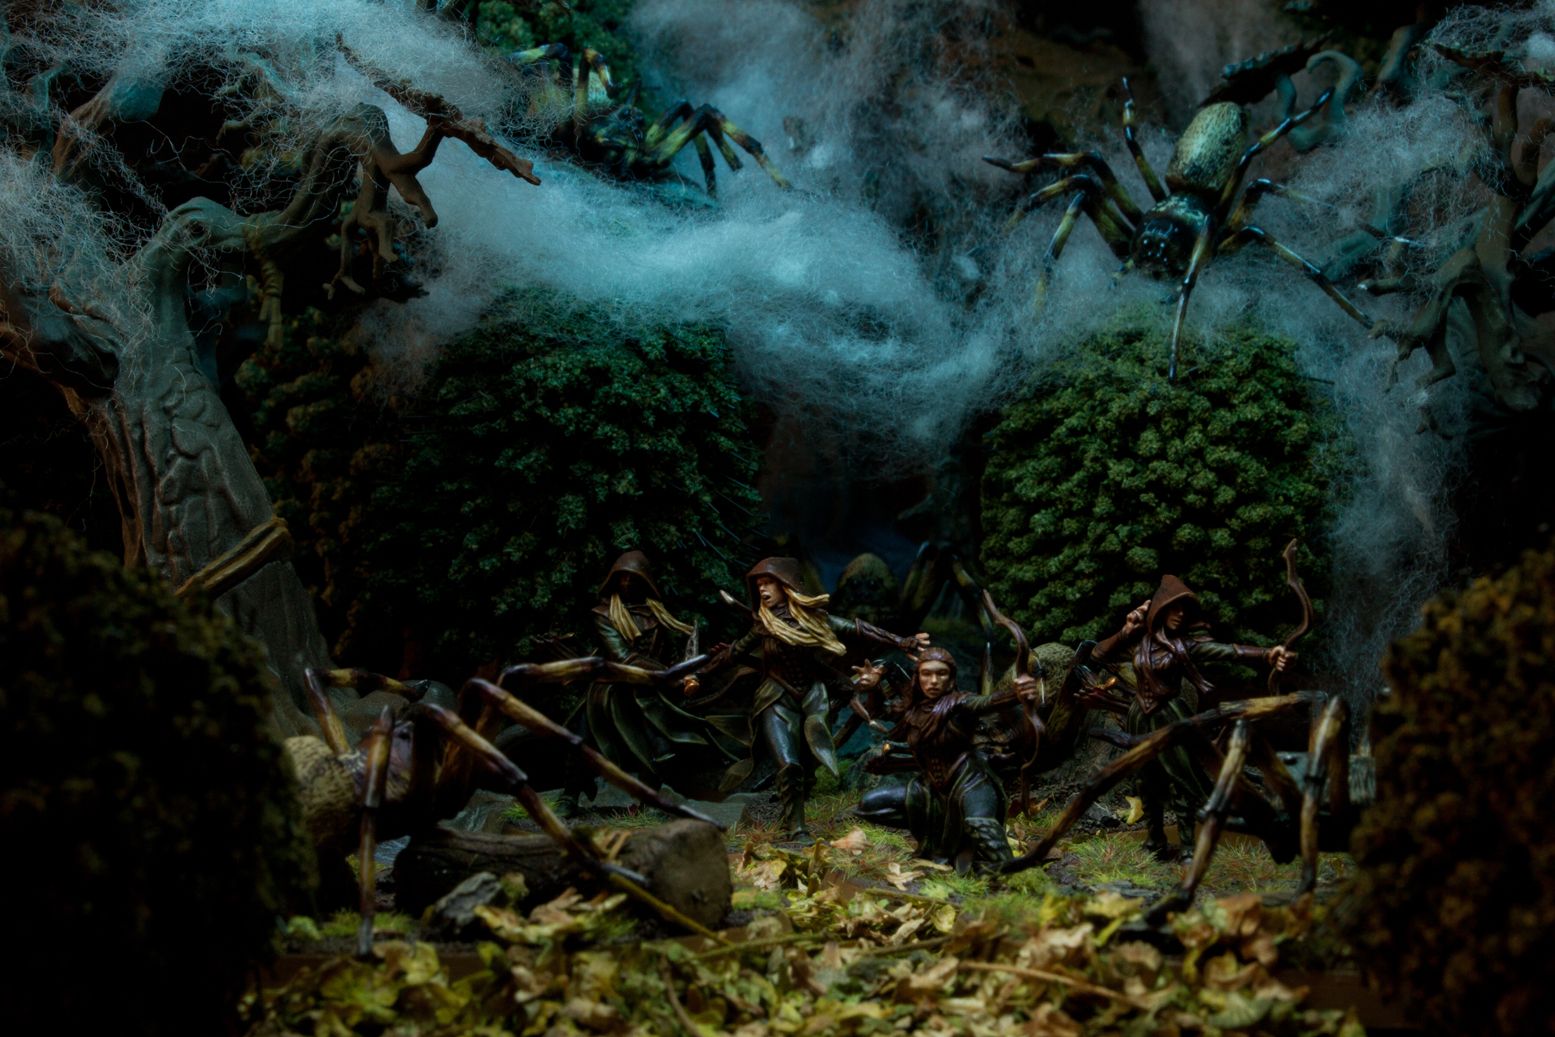 Showcase: Mirkwood Spiders from the Hobbit of Painters